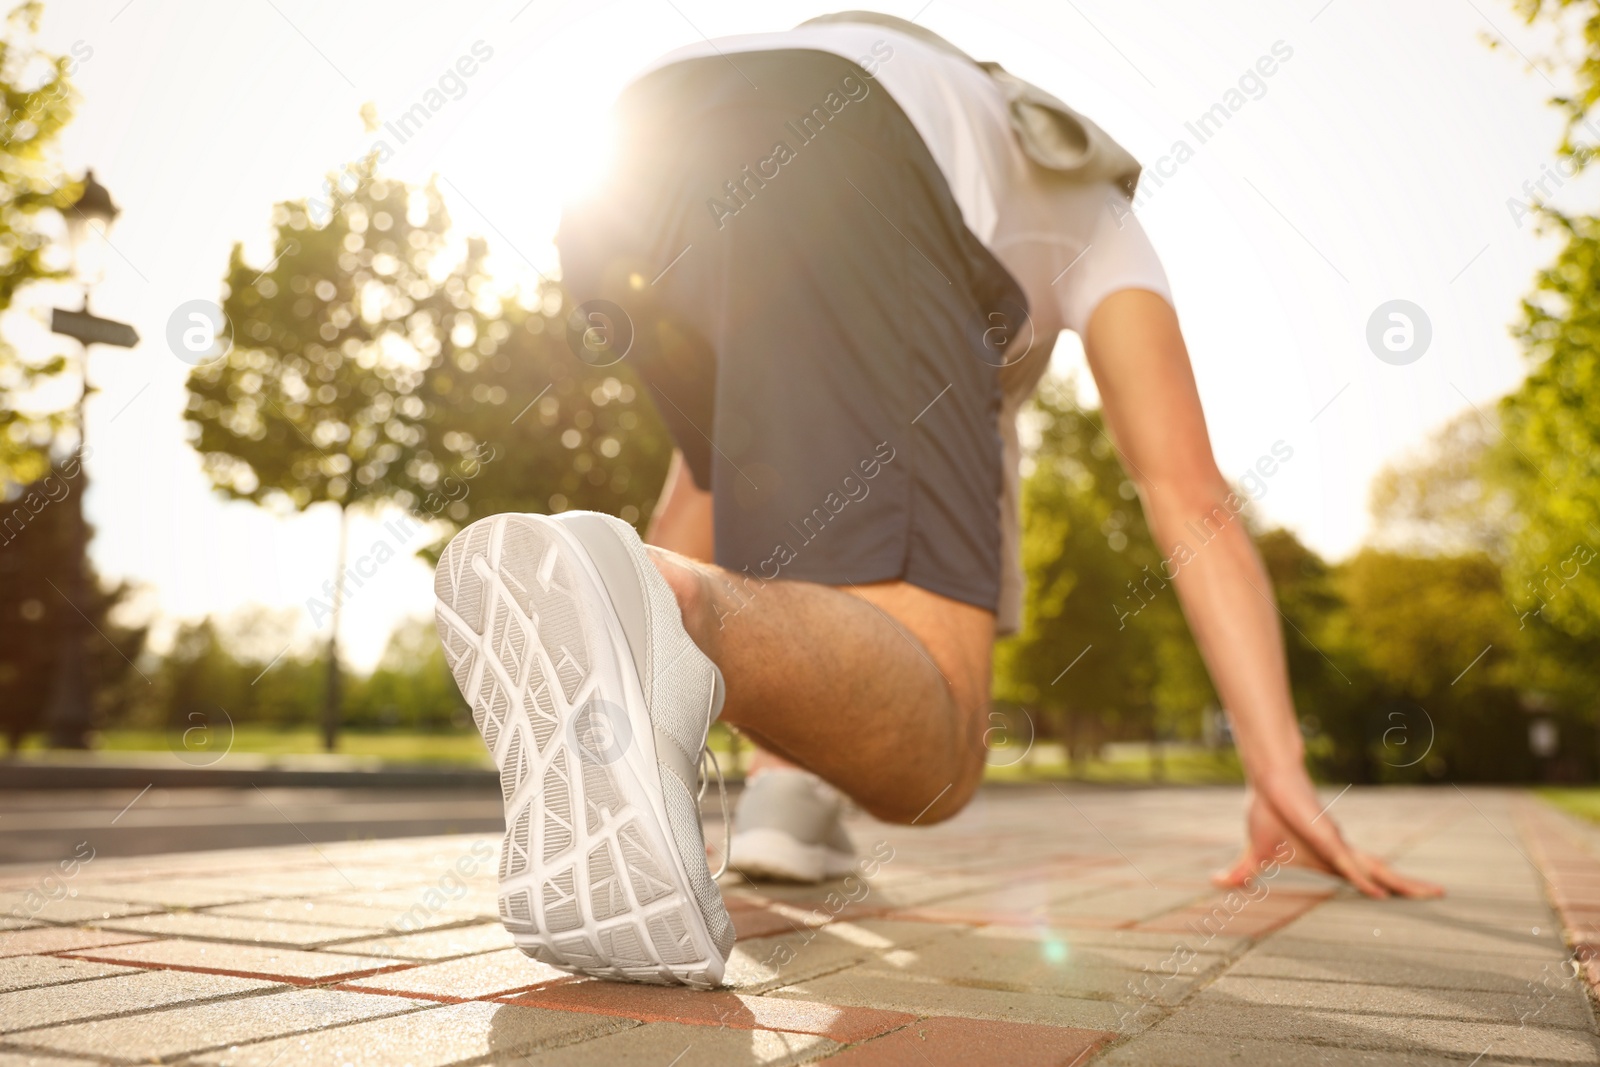 Photo of Man in fitness clothes ready for running outdoors, low angle view